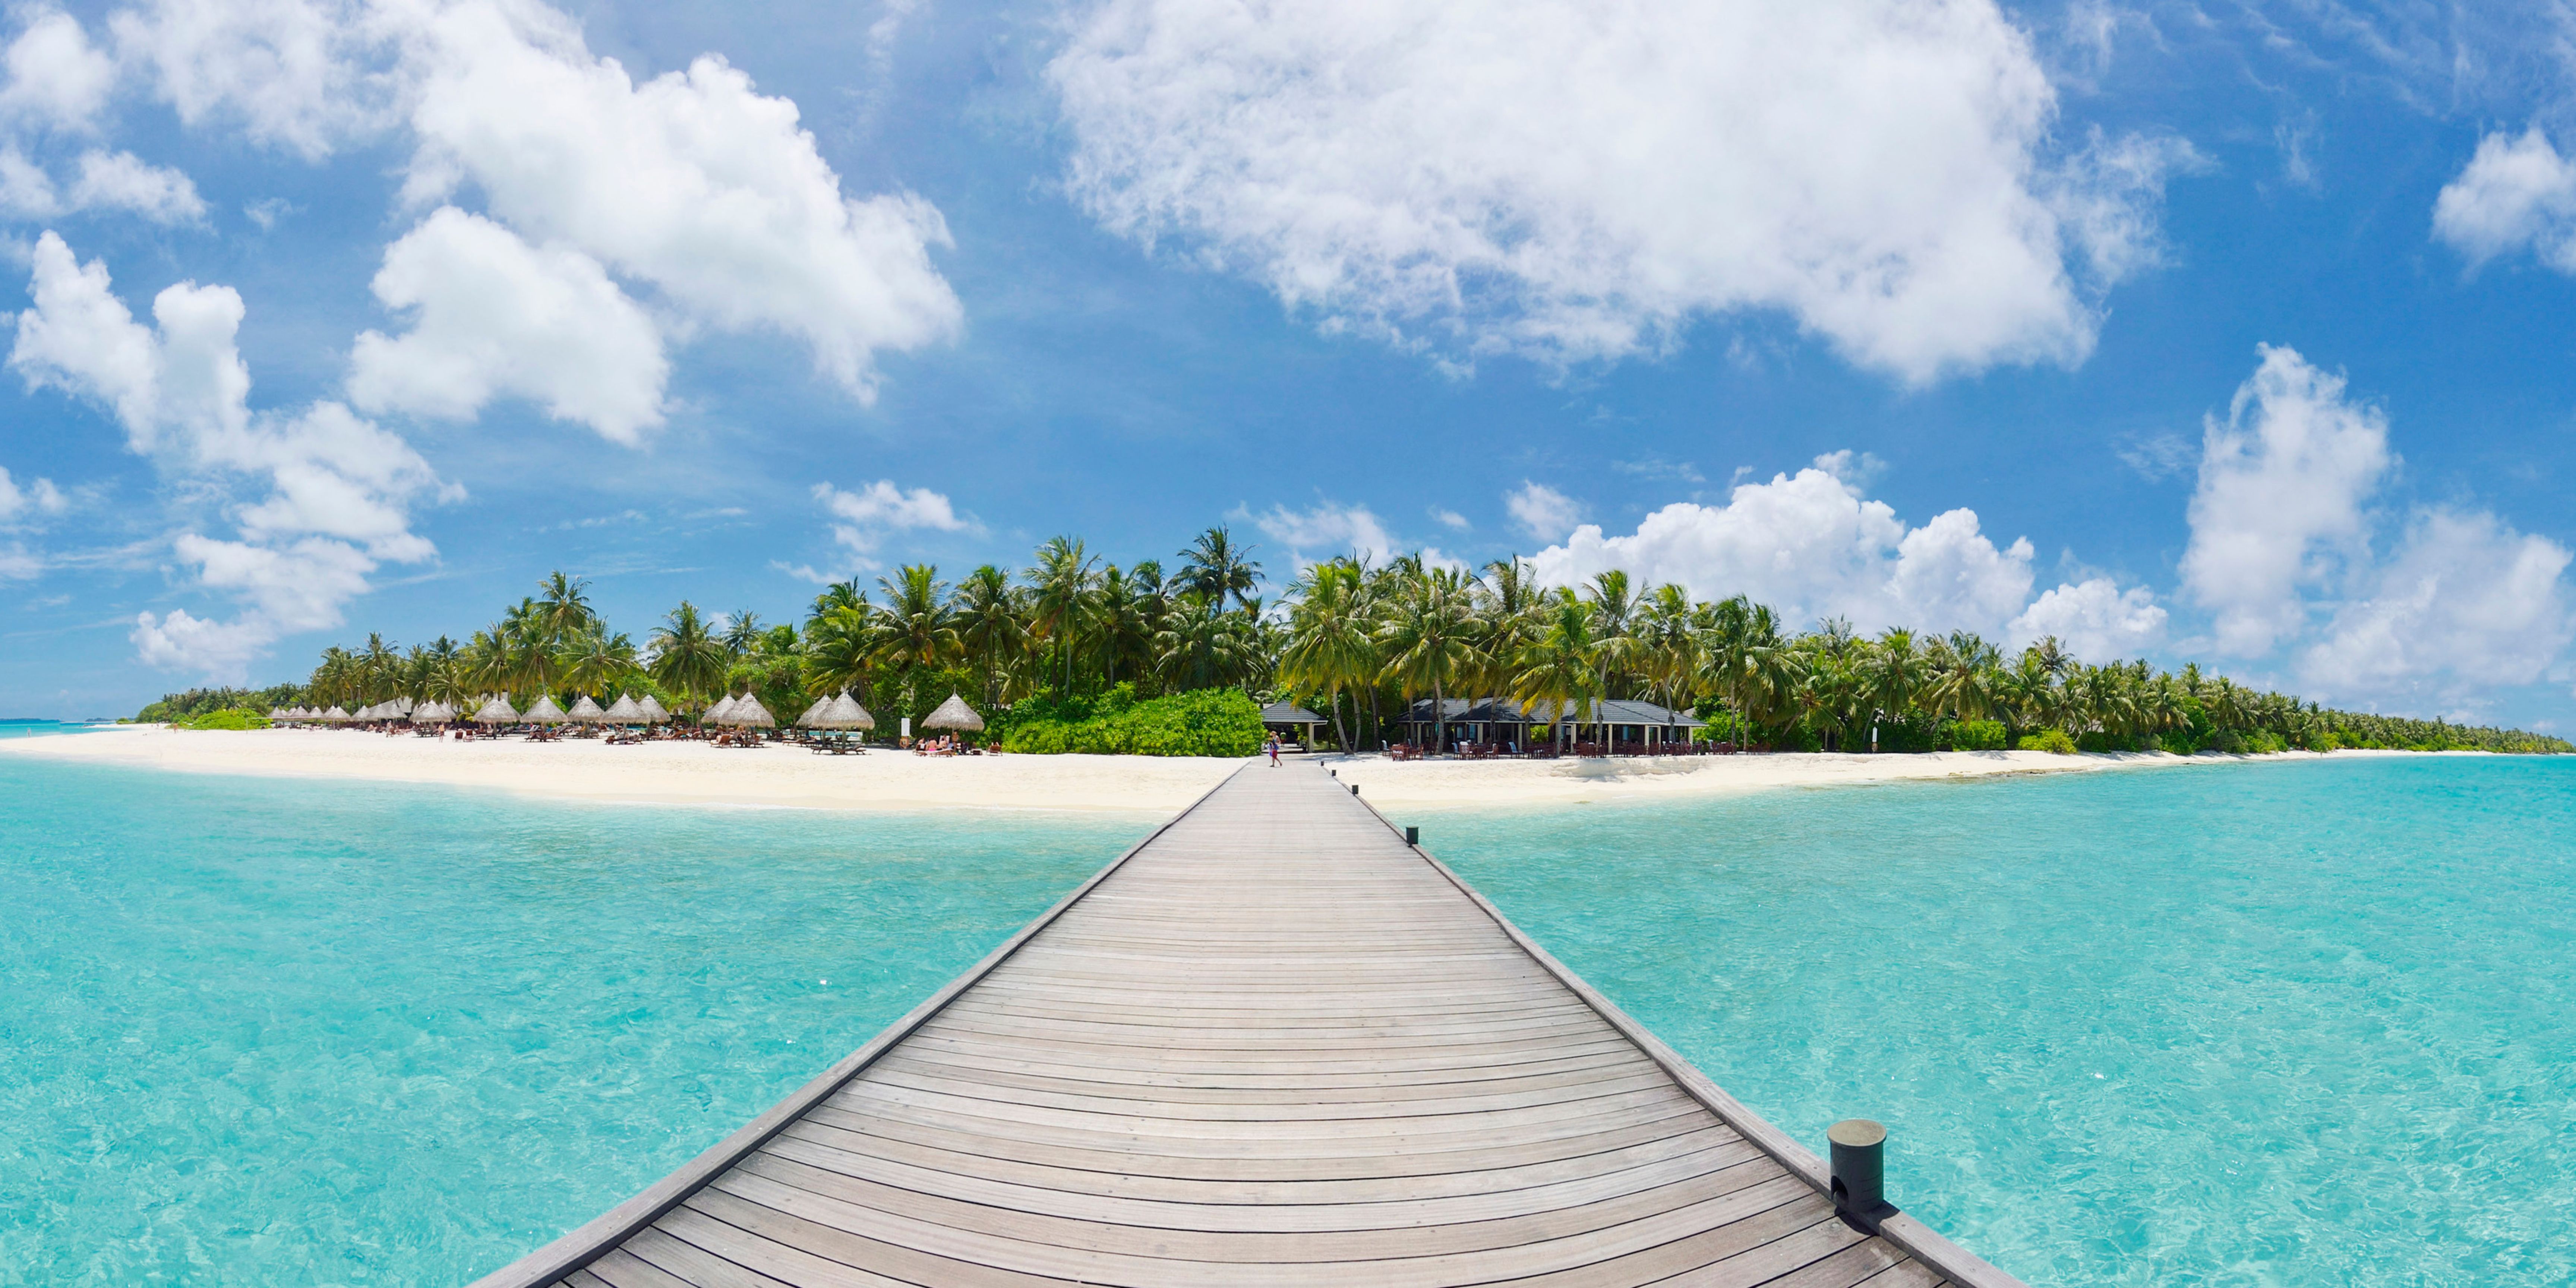 Villa Hotels & Resorts is Now Villa Resorts, Bringing a New Level Of Luxury to the Maldives